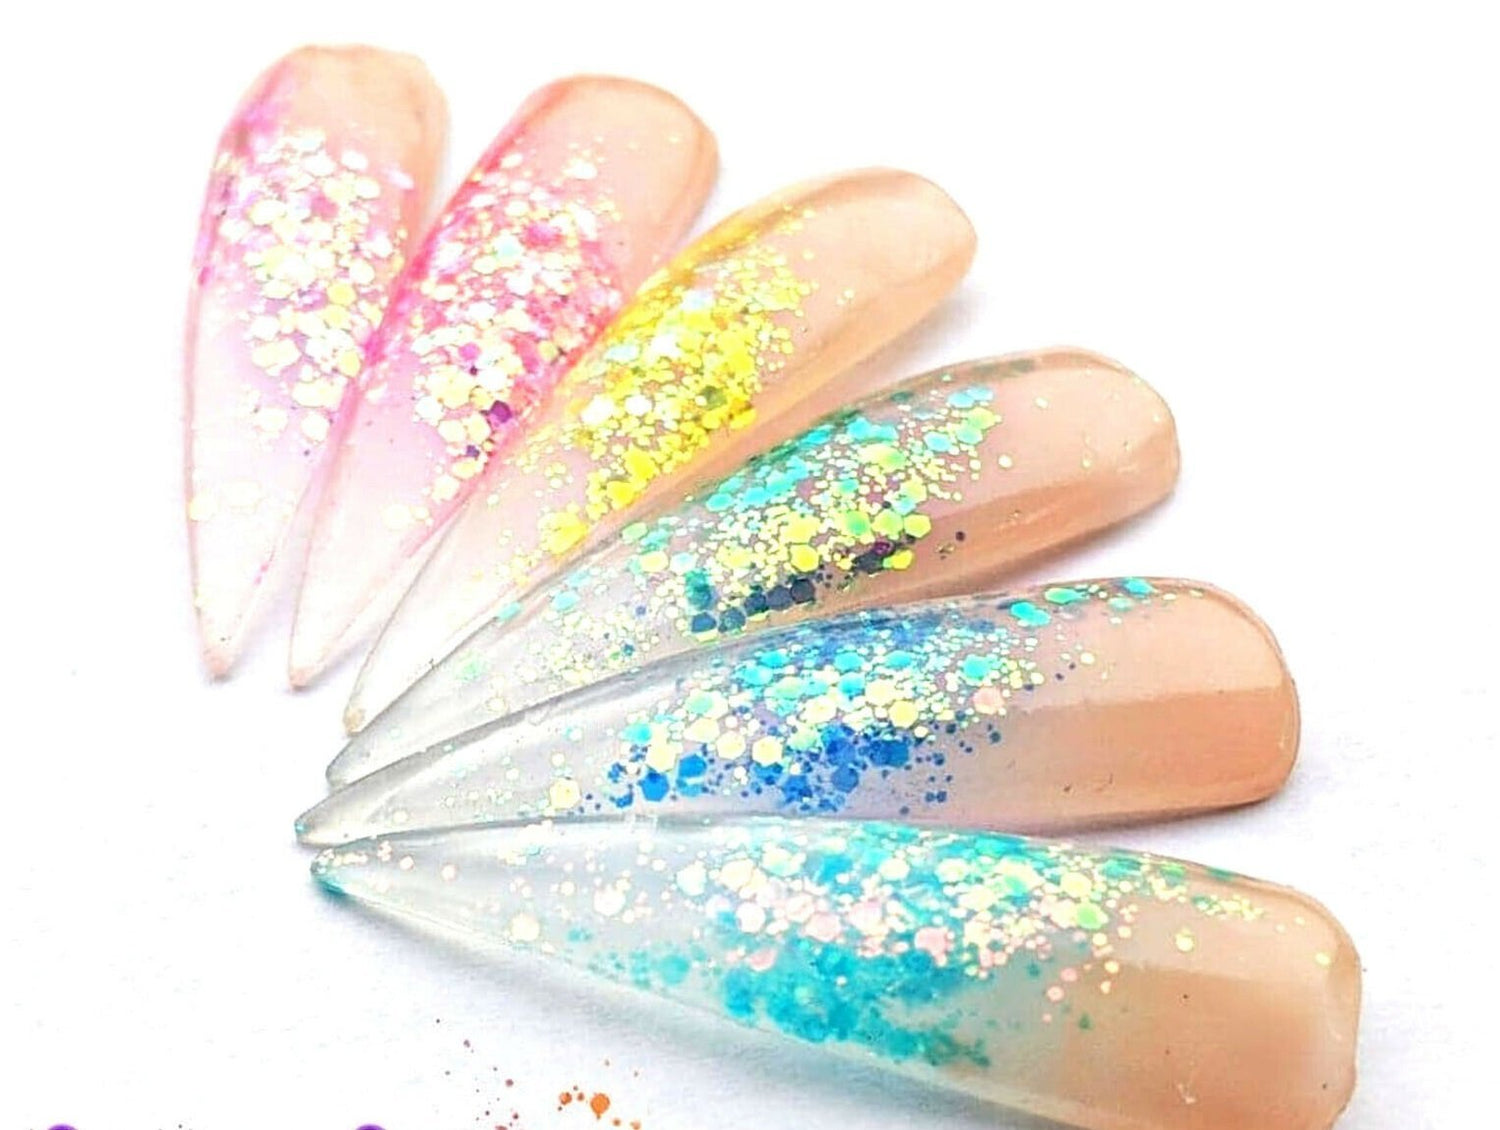 Sequins & Glitter Nail Art and Design. This collection includes many shapes and colored for gel and acrylic design nail